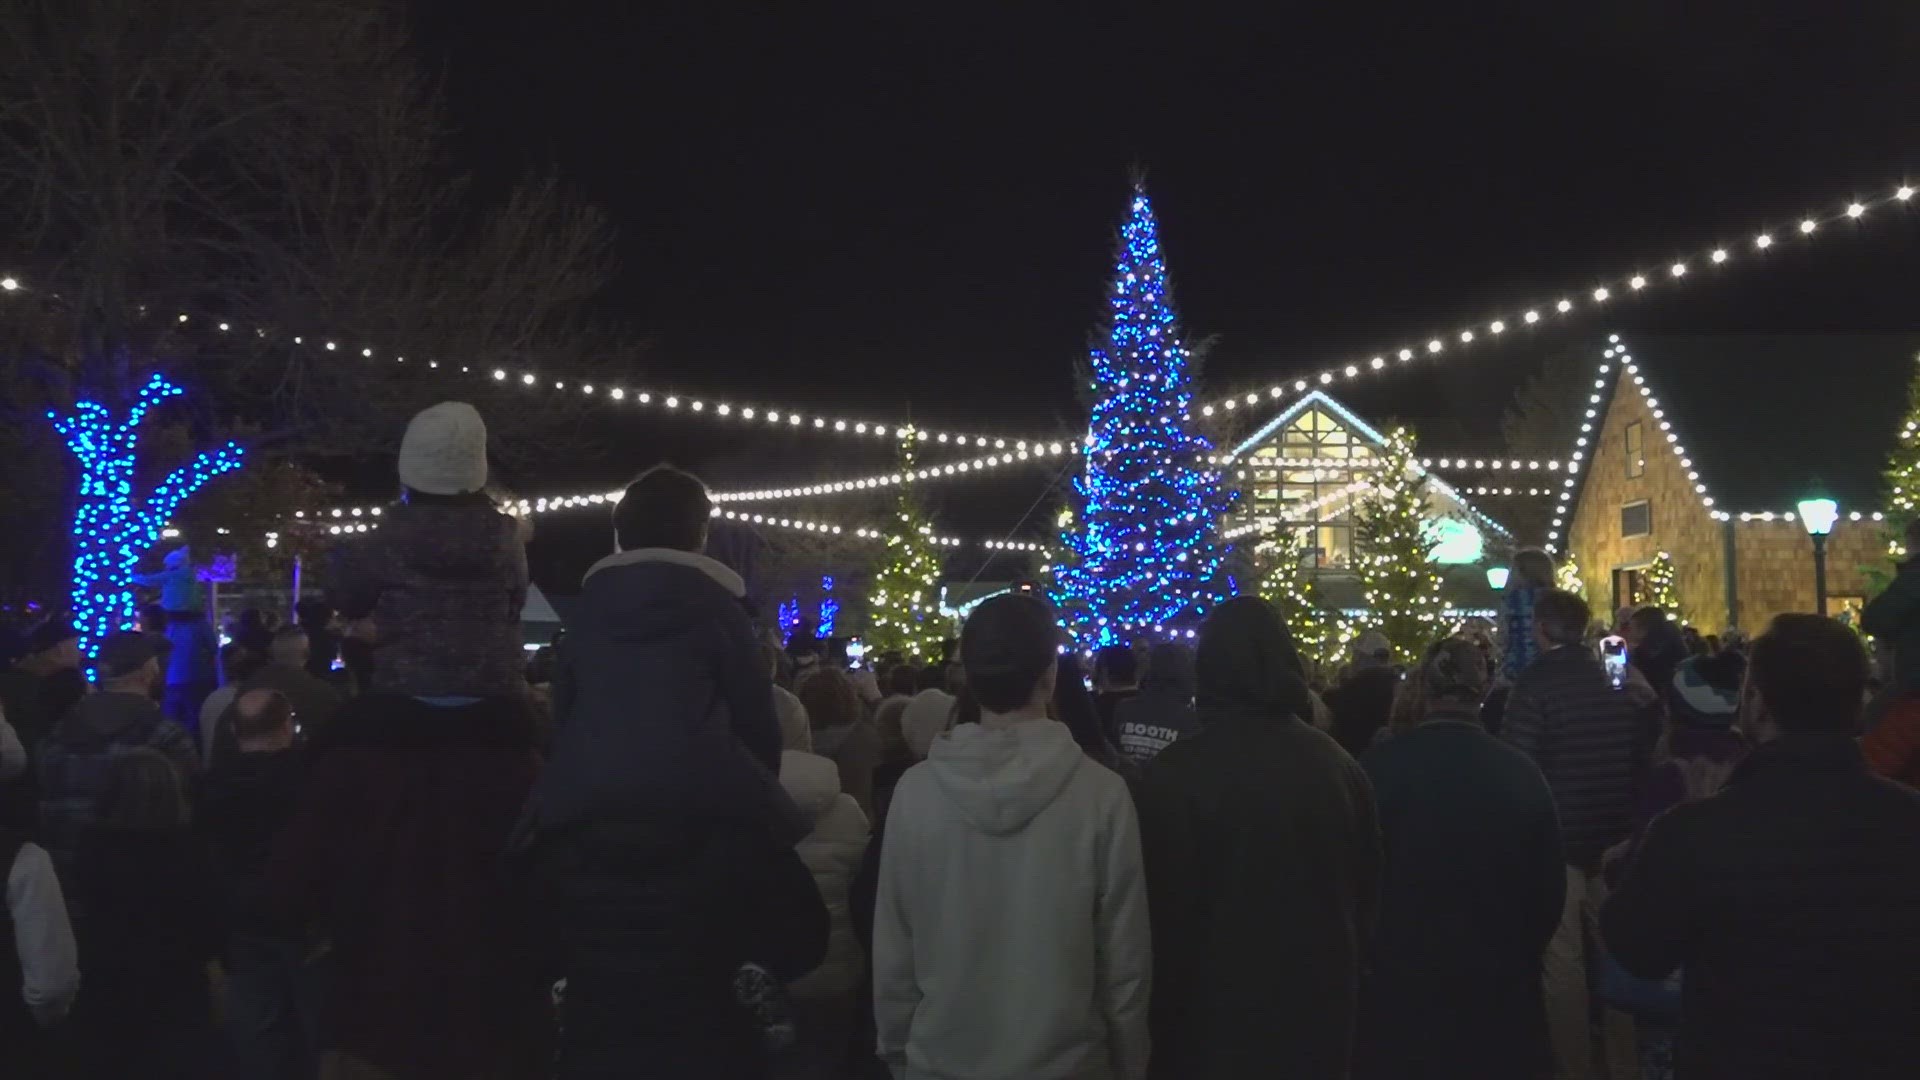 Hundreds gathered outside the flagship store in Freeport for the lighting ceremony. The tree was lit with 250,000 blue and white lights in honor of Lewiston.